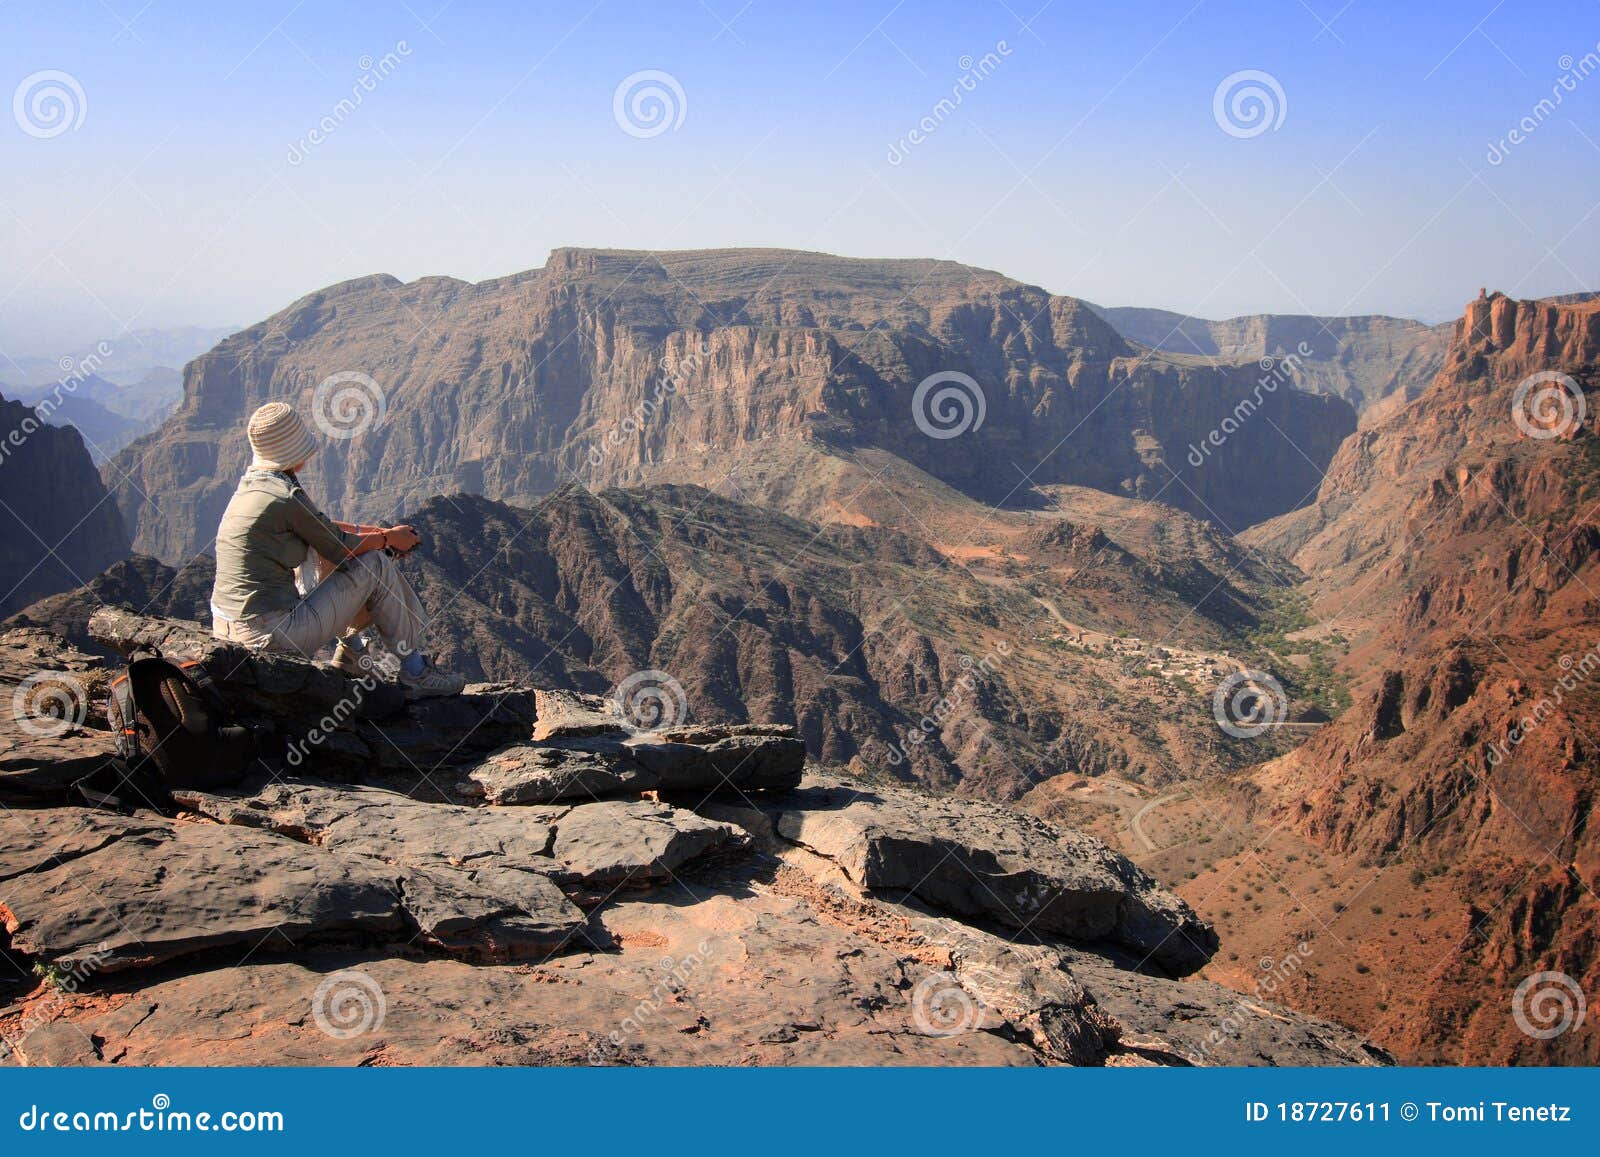 oman: tourist at diana's viewpoint